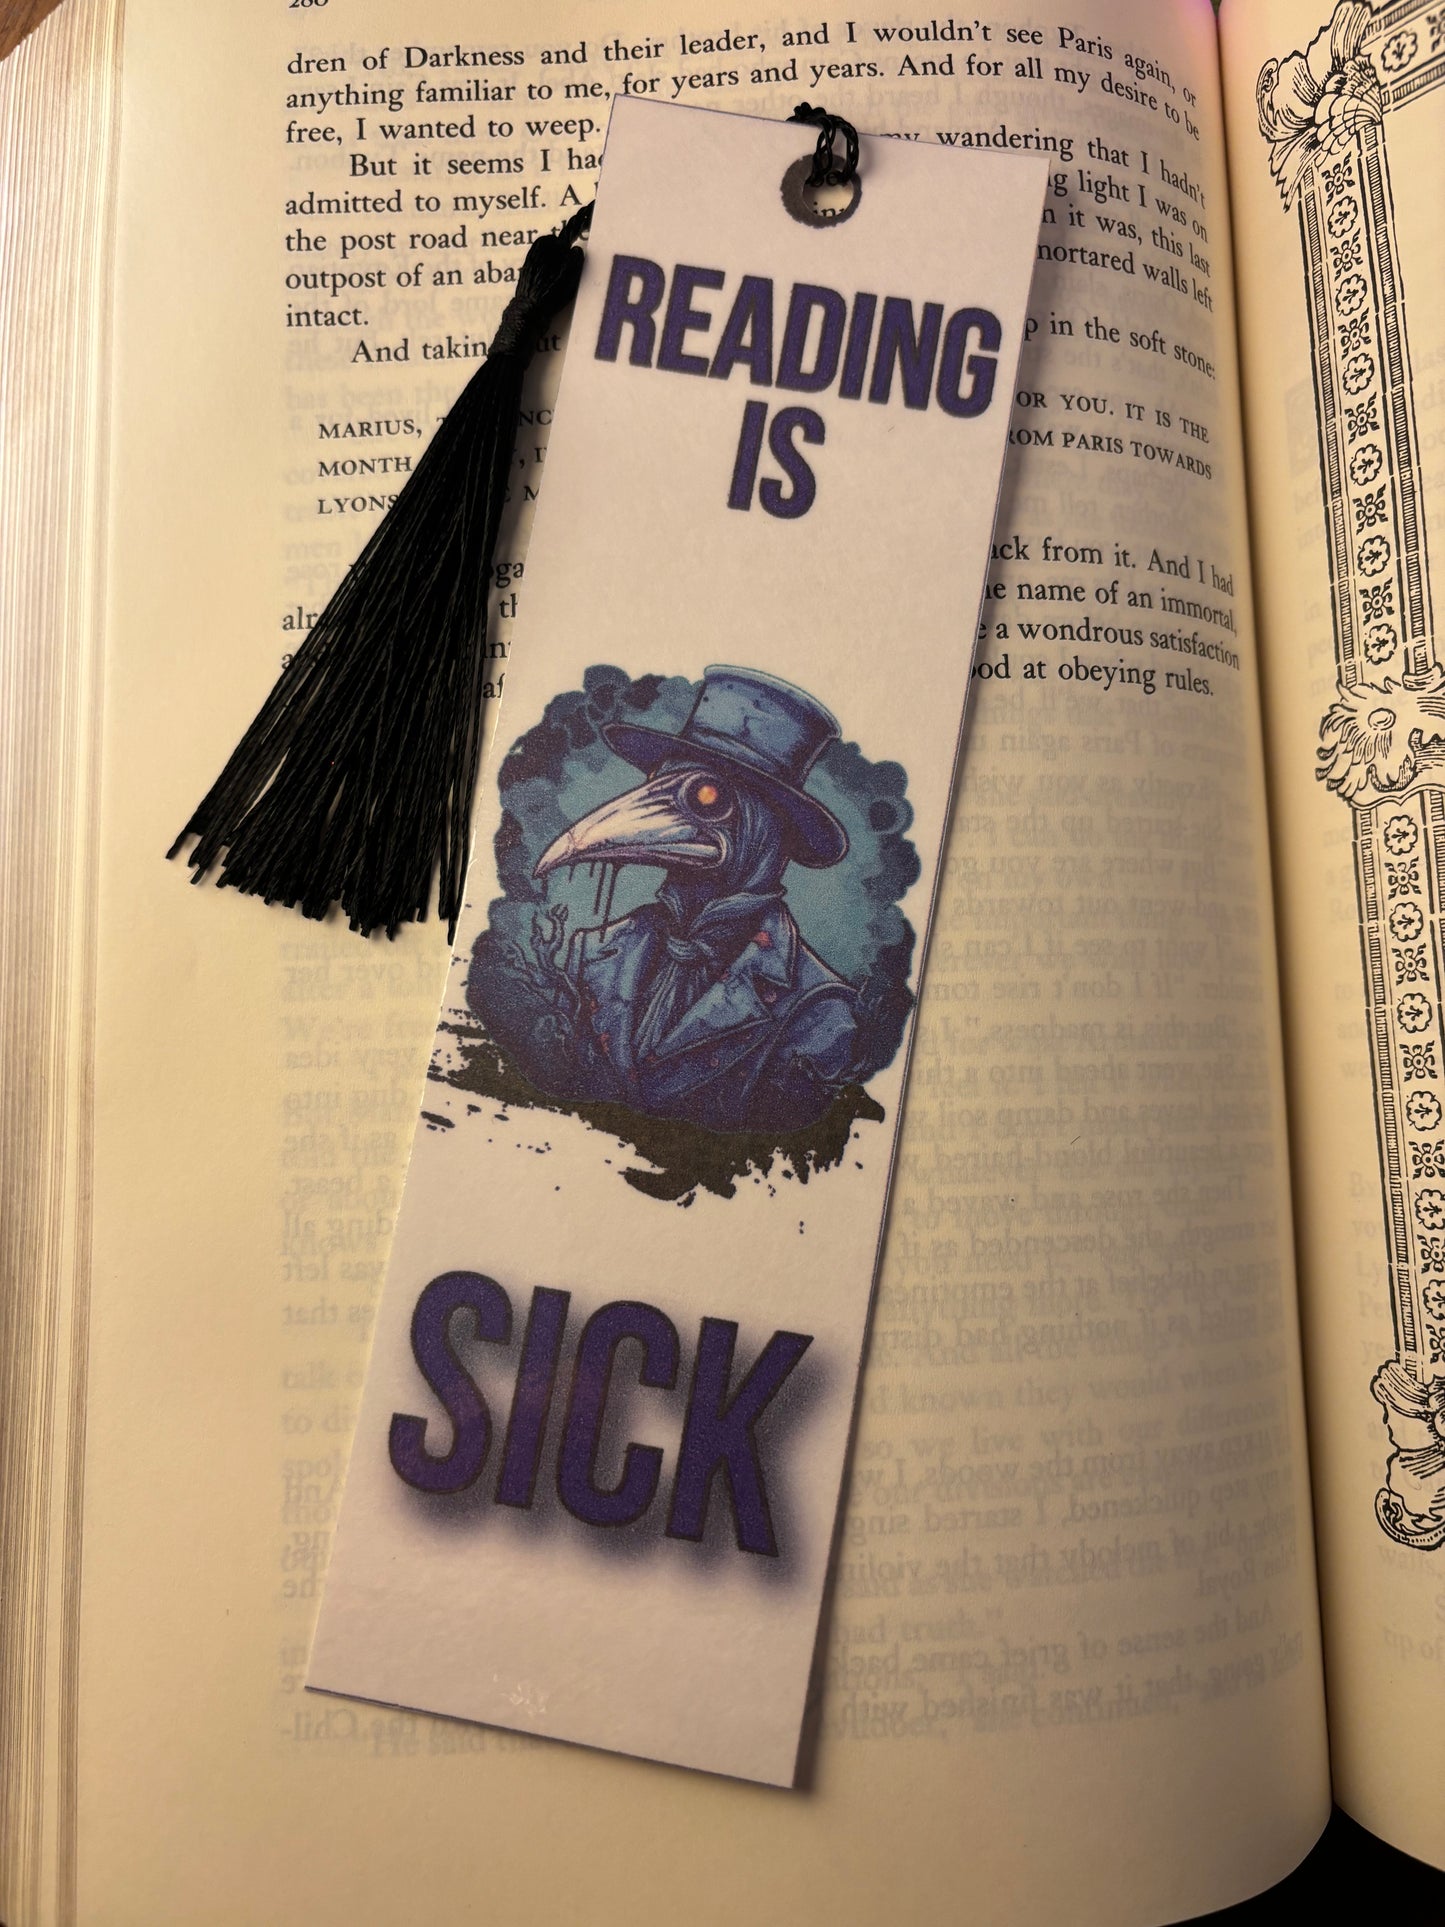 Reading is Sick - Plague Doctor Bookmarks (Set of 5)